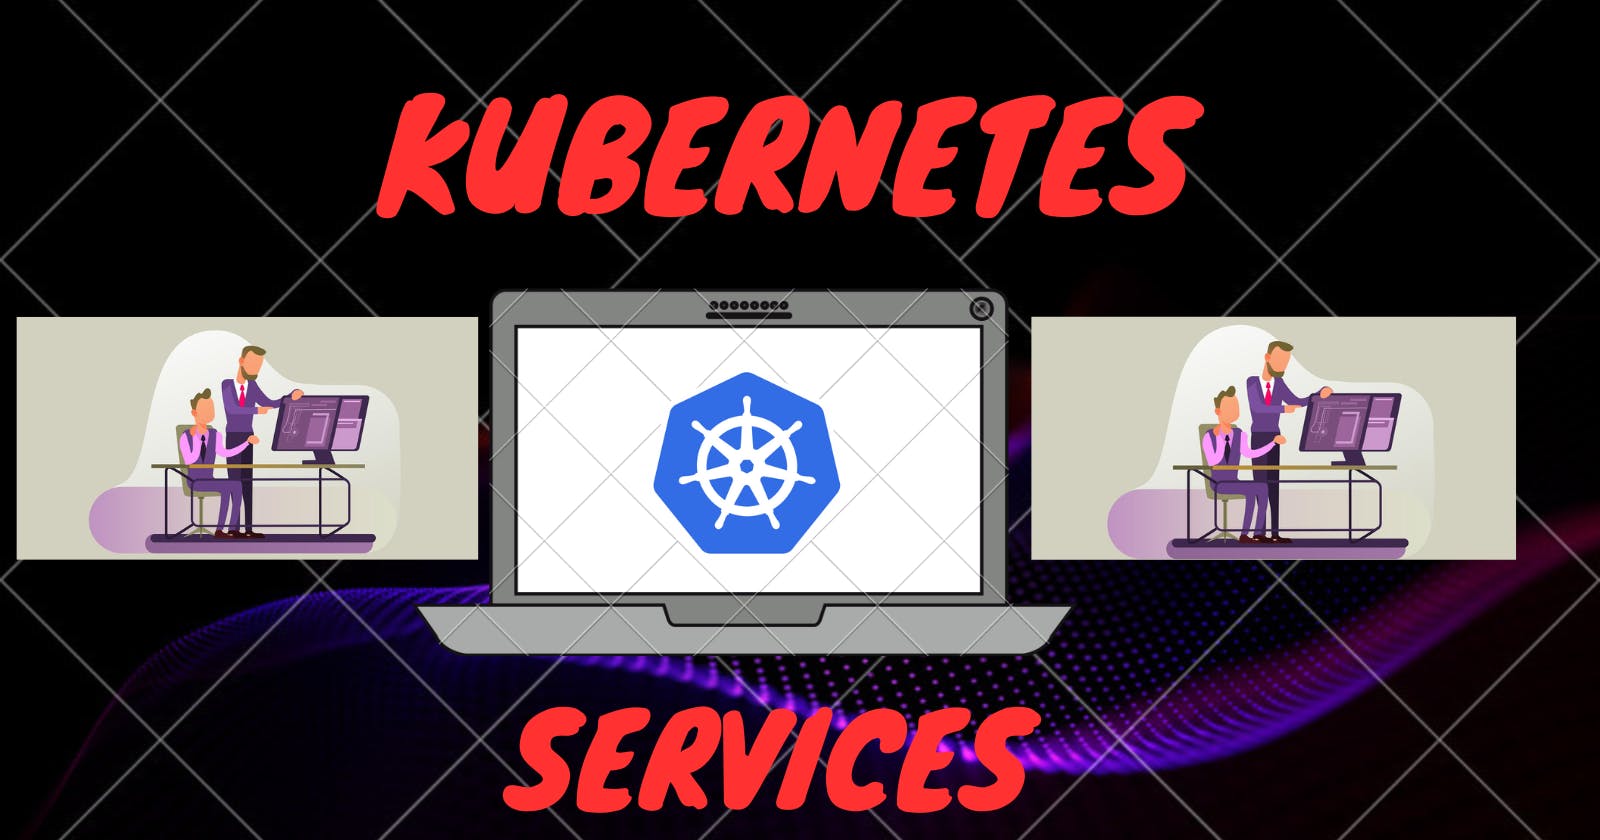 Working with Services in Kubernetes